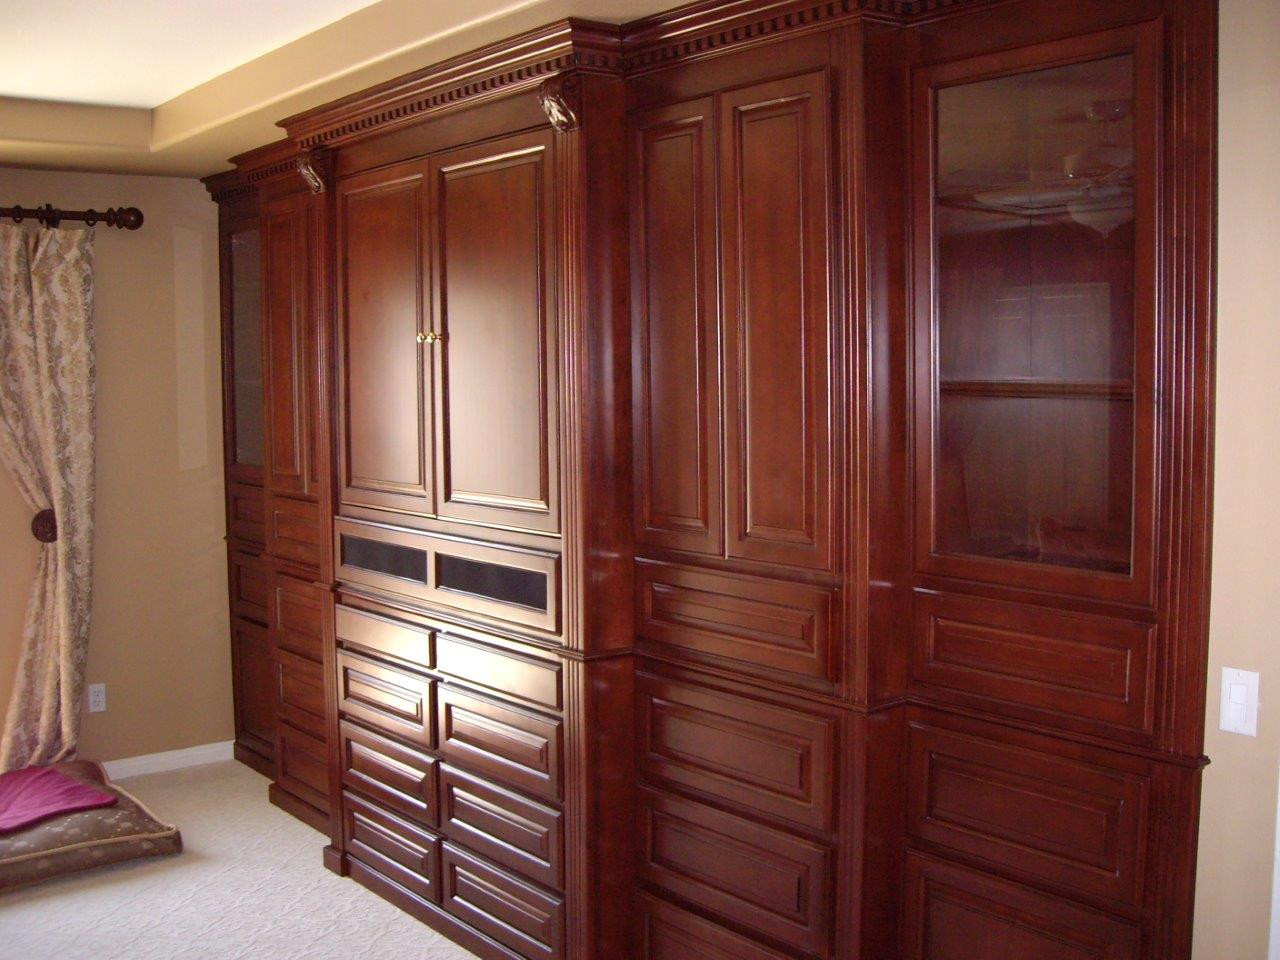 Bedroom Cabinet Storage
 Murphy Beds and Bedroom Cabinets Woodwork Creations